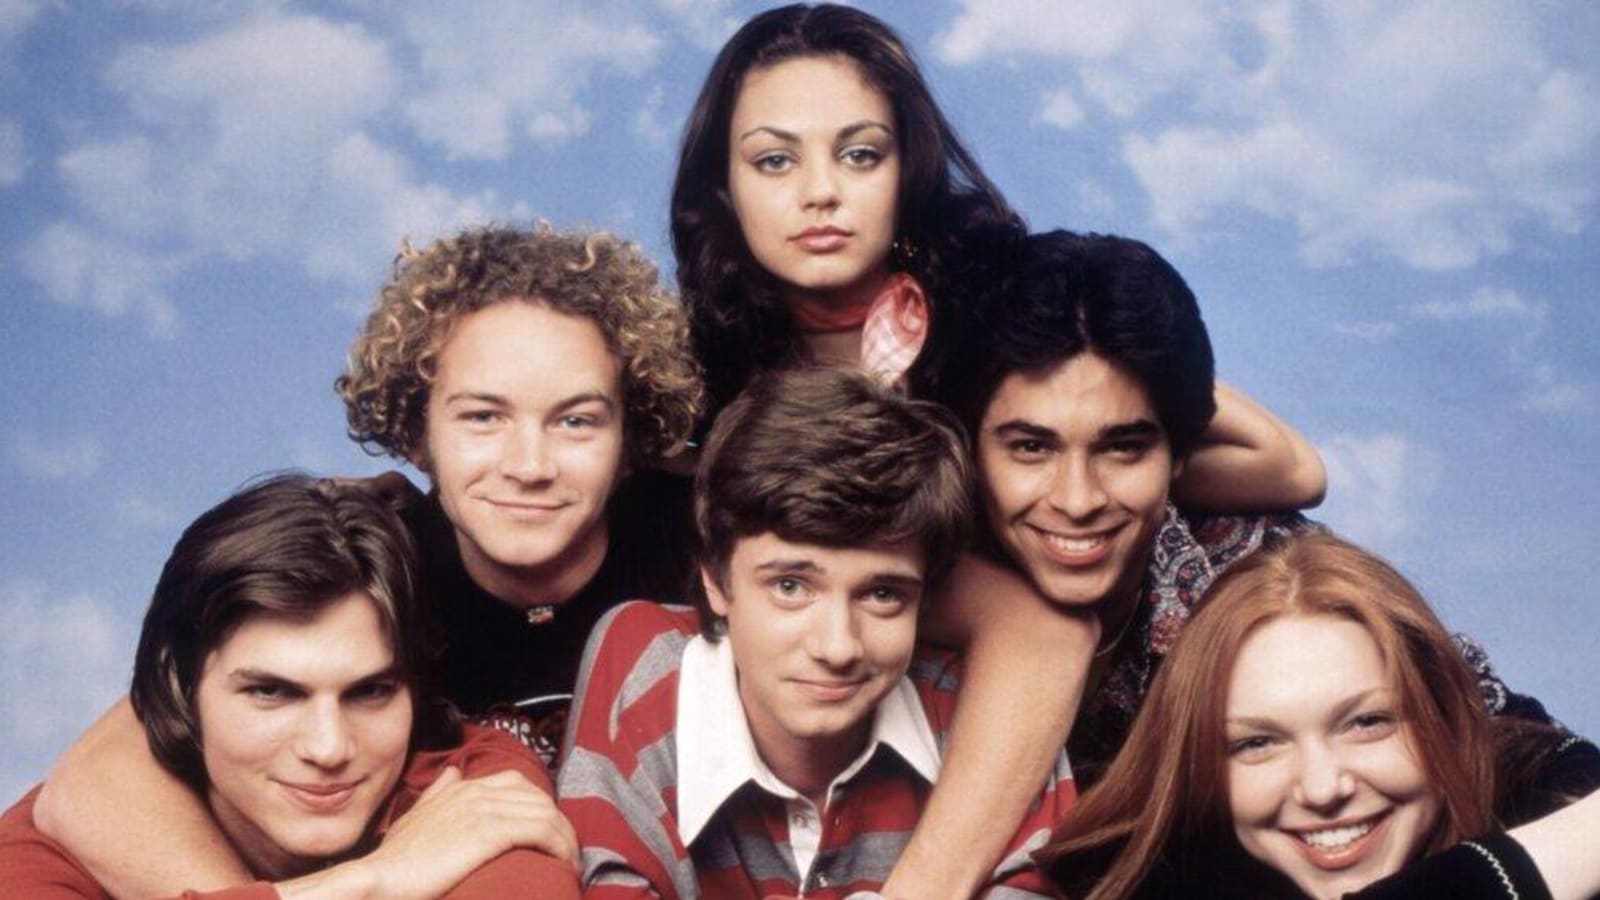 ‘That ‘70s Show’ Turns 25: 10 Best Episodes, According to Fans (VIDEO)